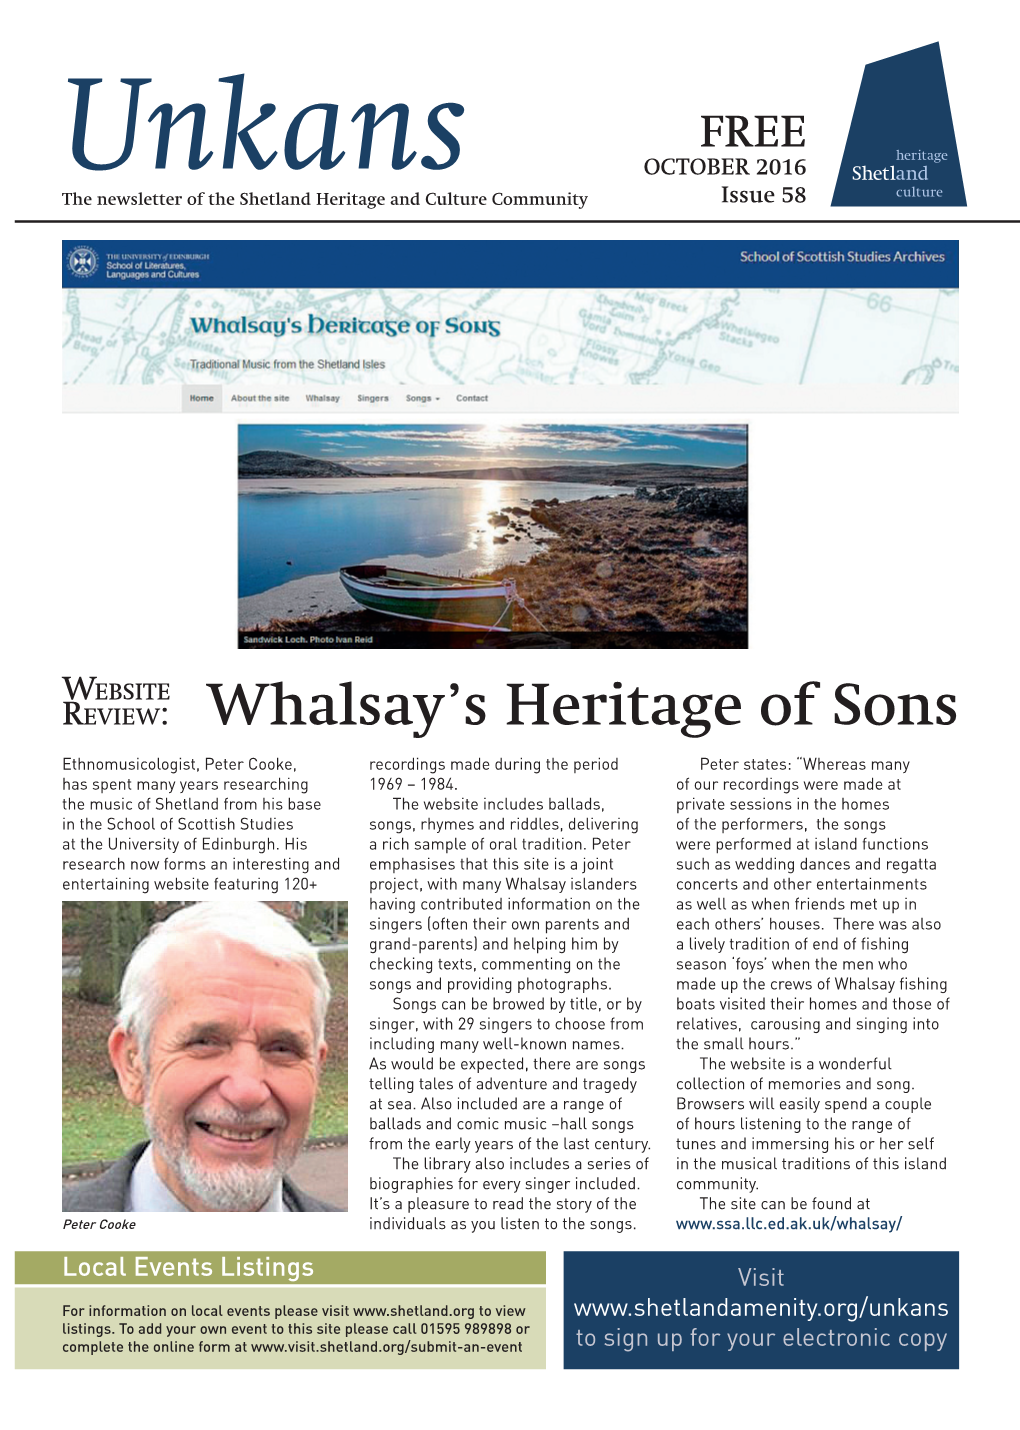 Whalsay's Heritage of Sons